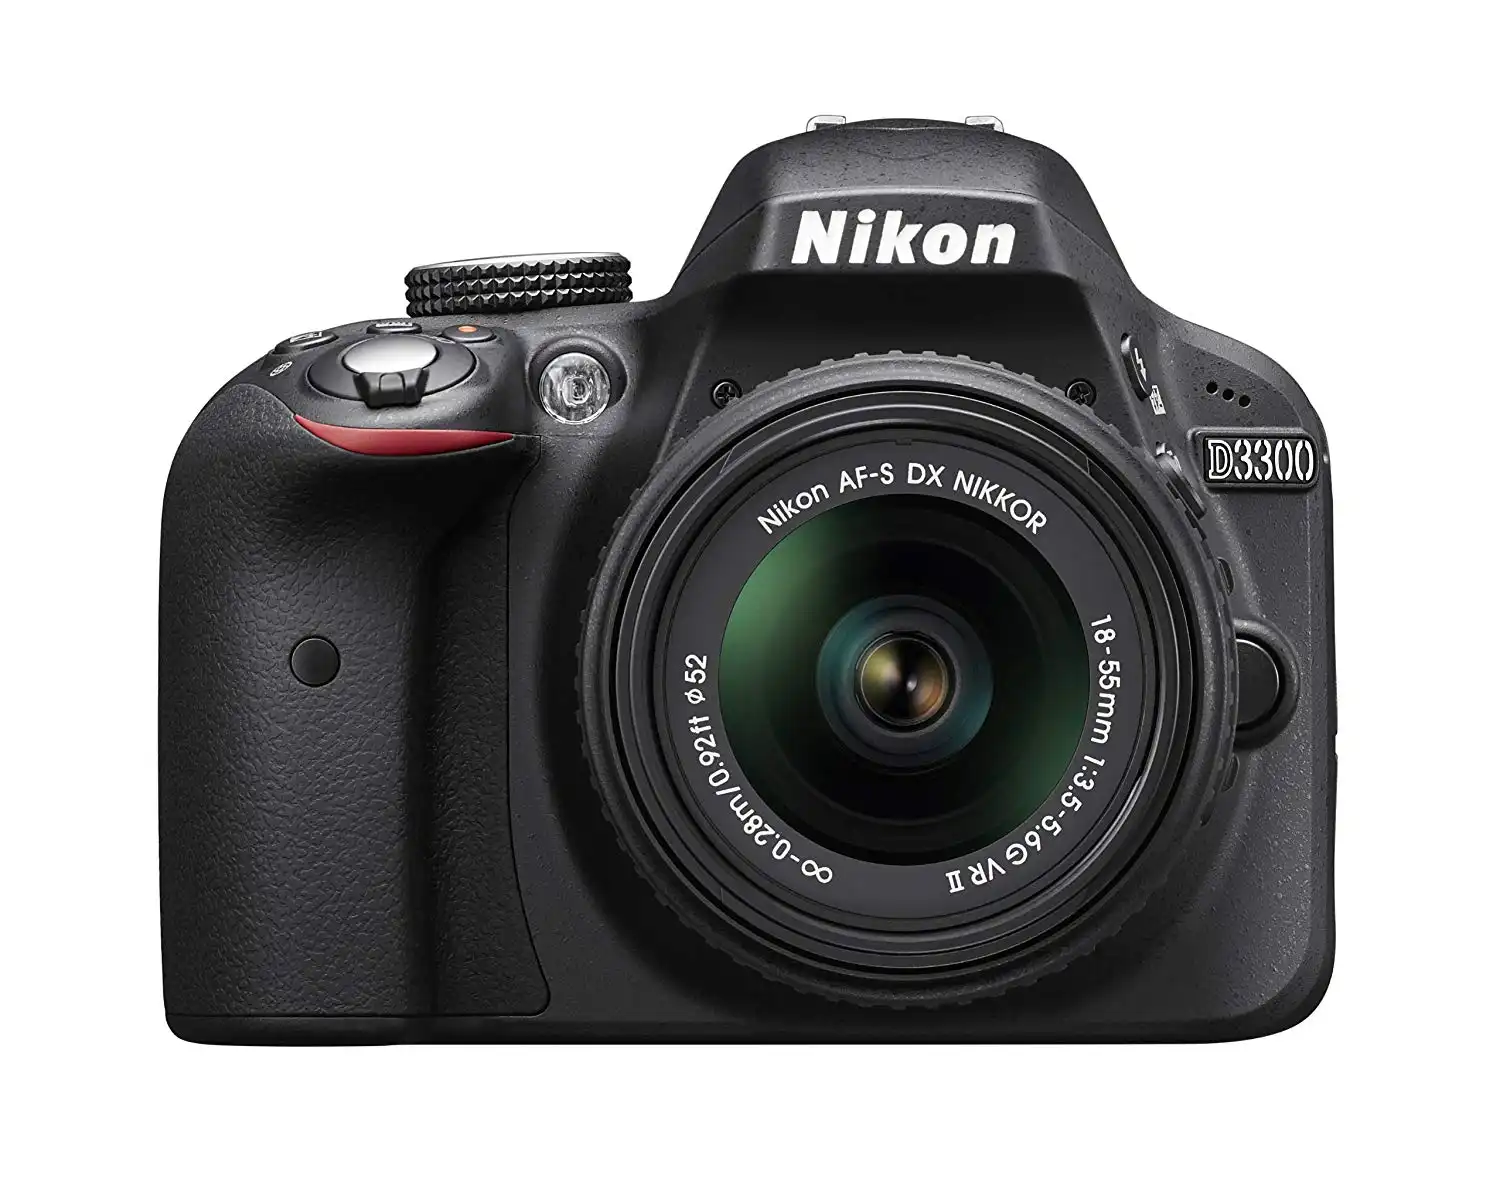 Review on Specifications of Nikon Digital Camera D3300